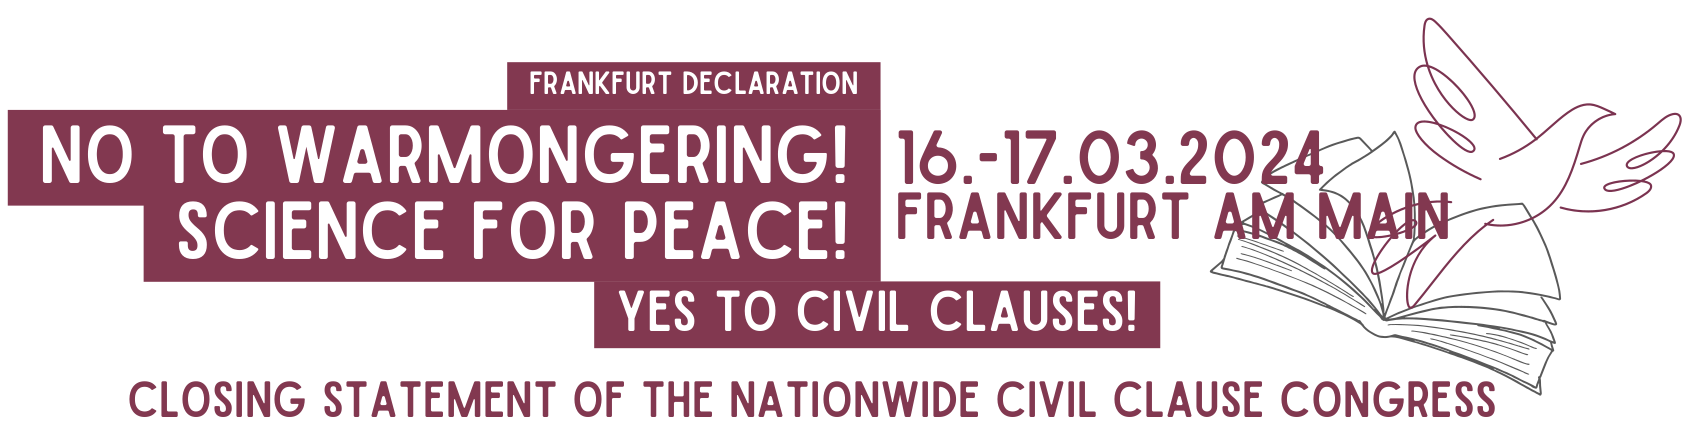 No to warmongering! Science for peace! Yes to civil clauses! - Frankfurt declaration in English